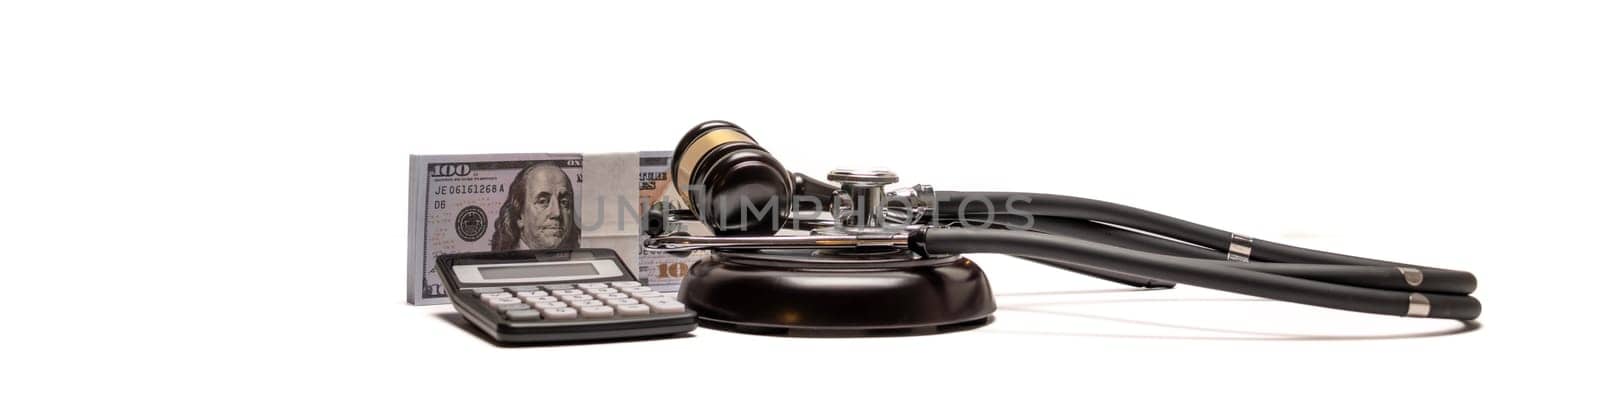 Gavel and Money Concept for Financial Legal Issues. by jbruiz78